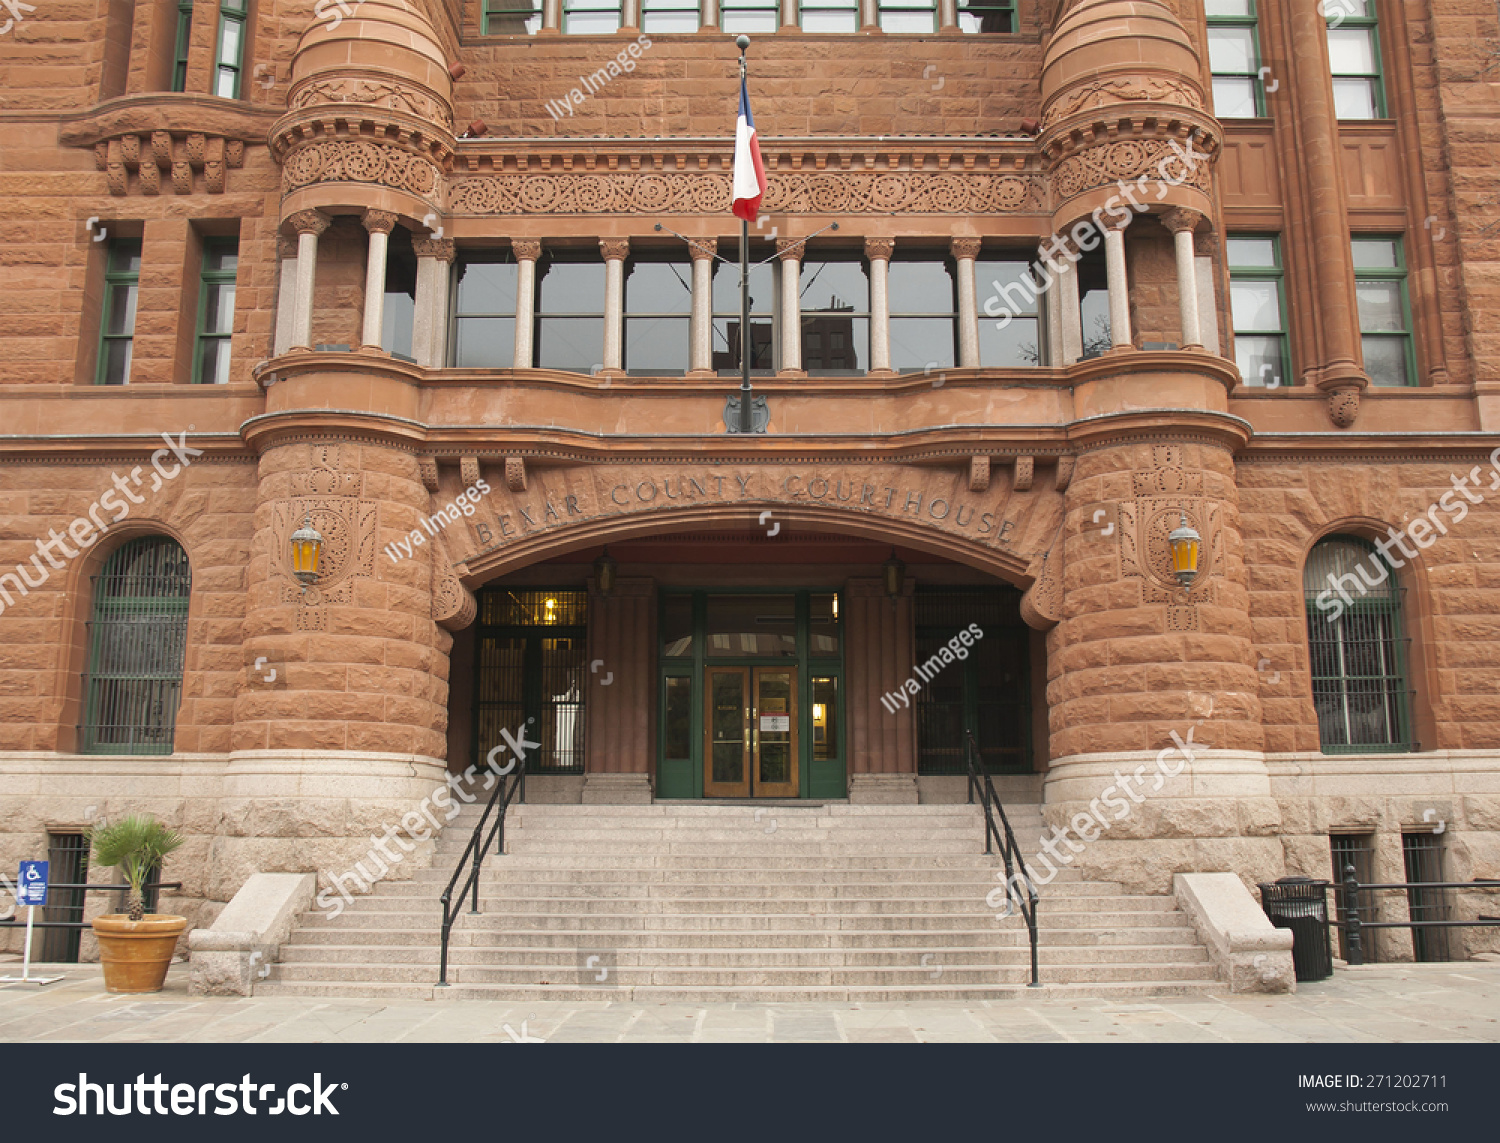 Bexar County Courthouse Historic Building Downtown Stock Photo 271202711 - Shutterstock1500 x 1143